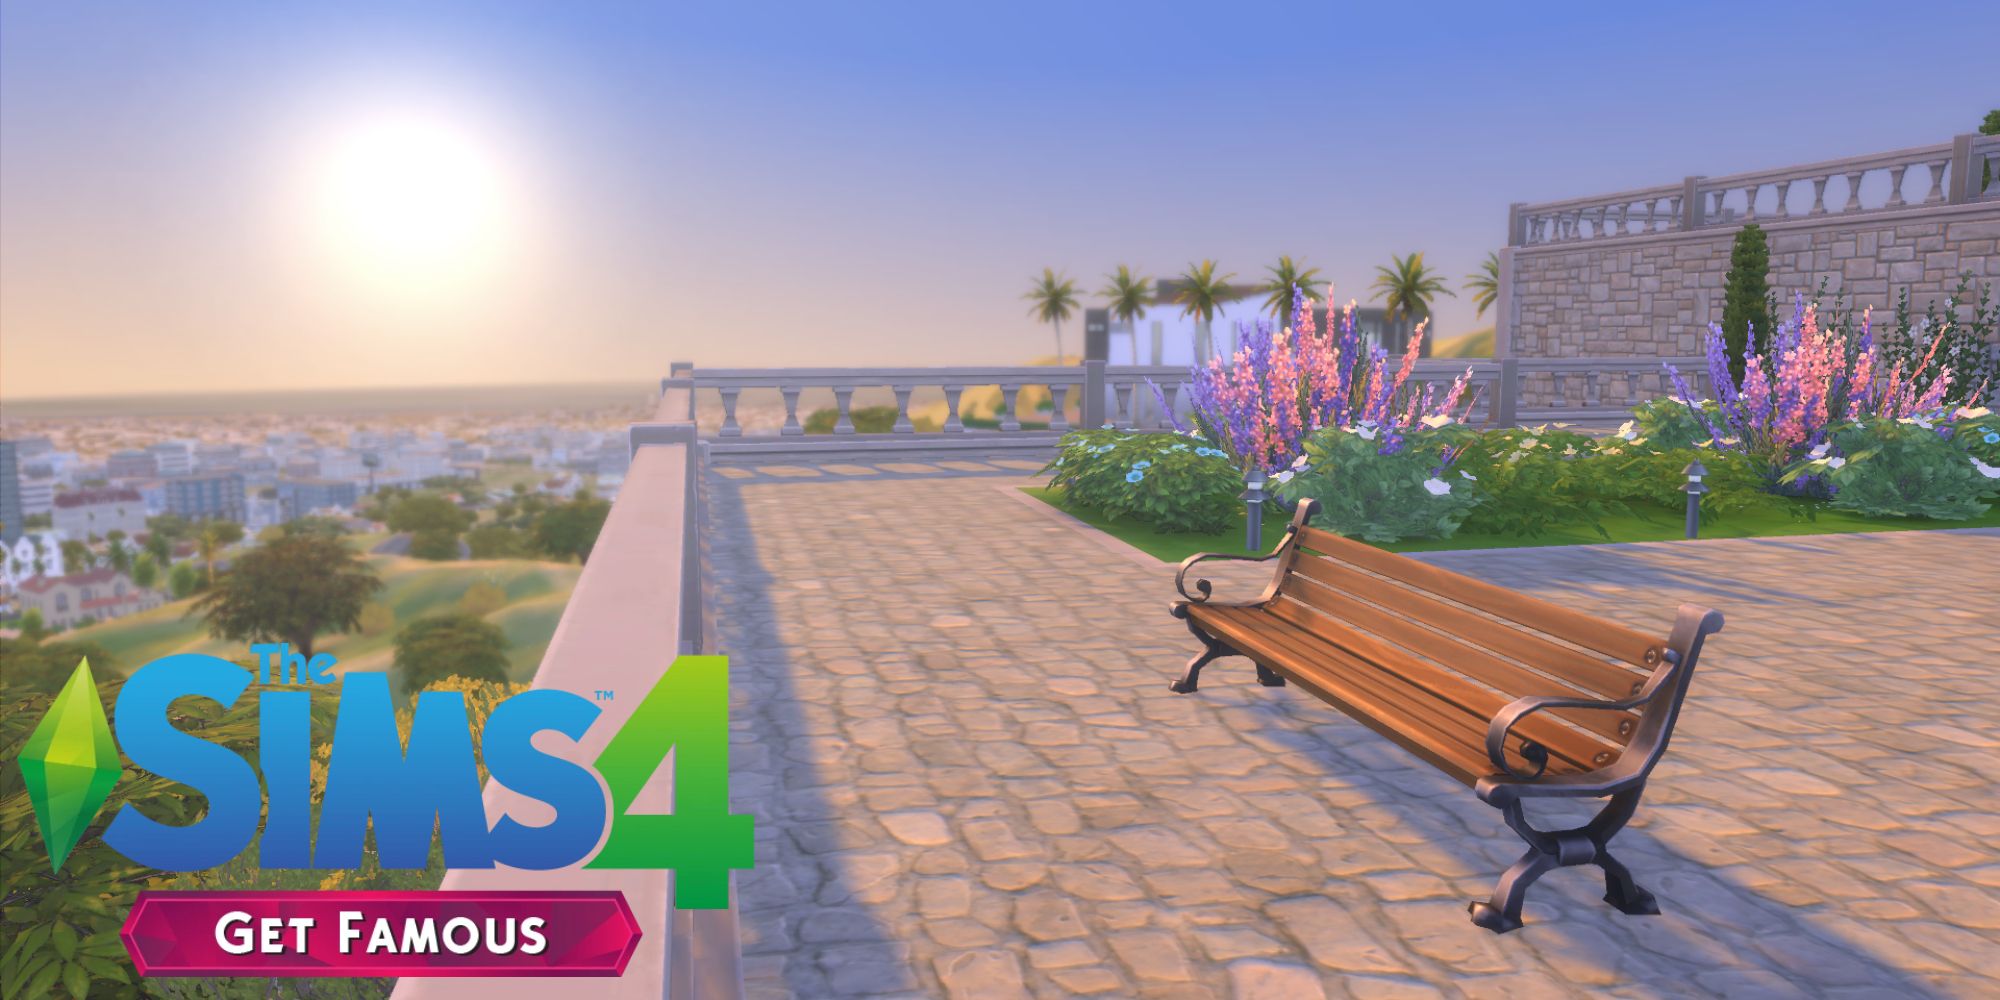 Del Sol Valley, the world from the Get Famous expansion, is one of the hottest worlds in The Sims 4.